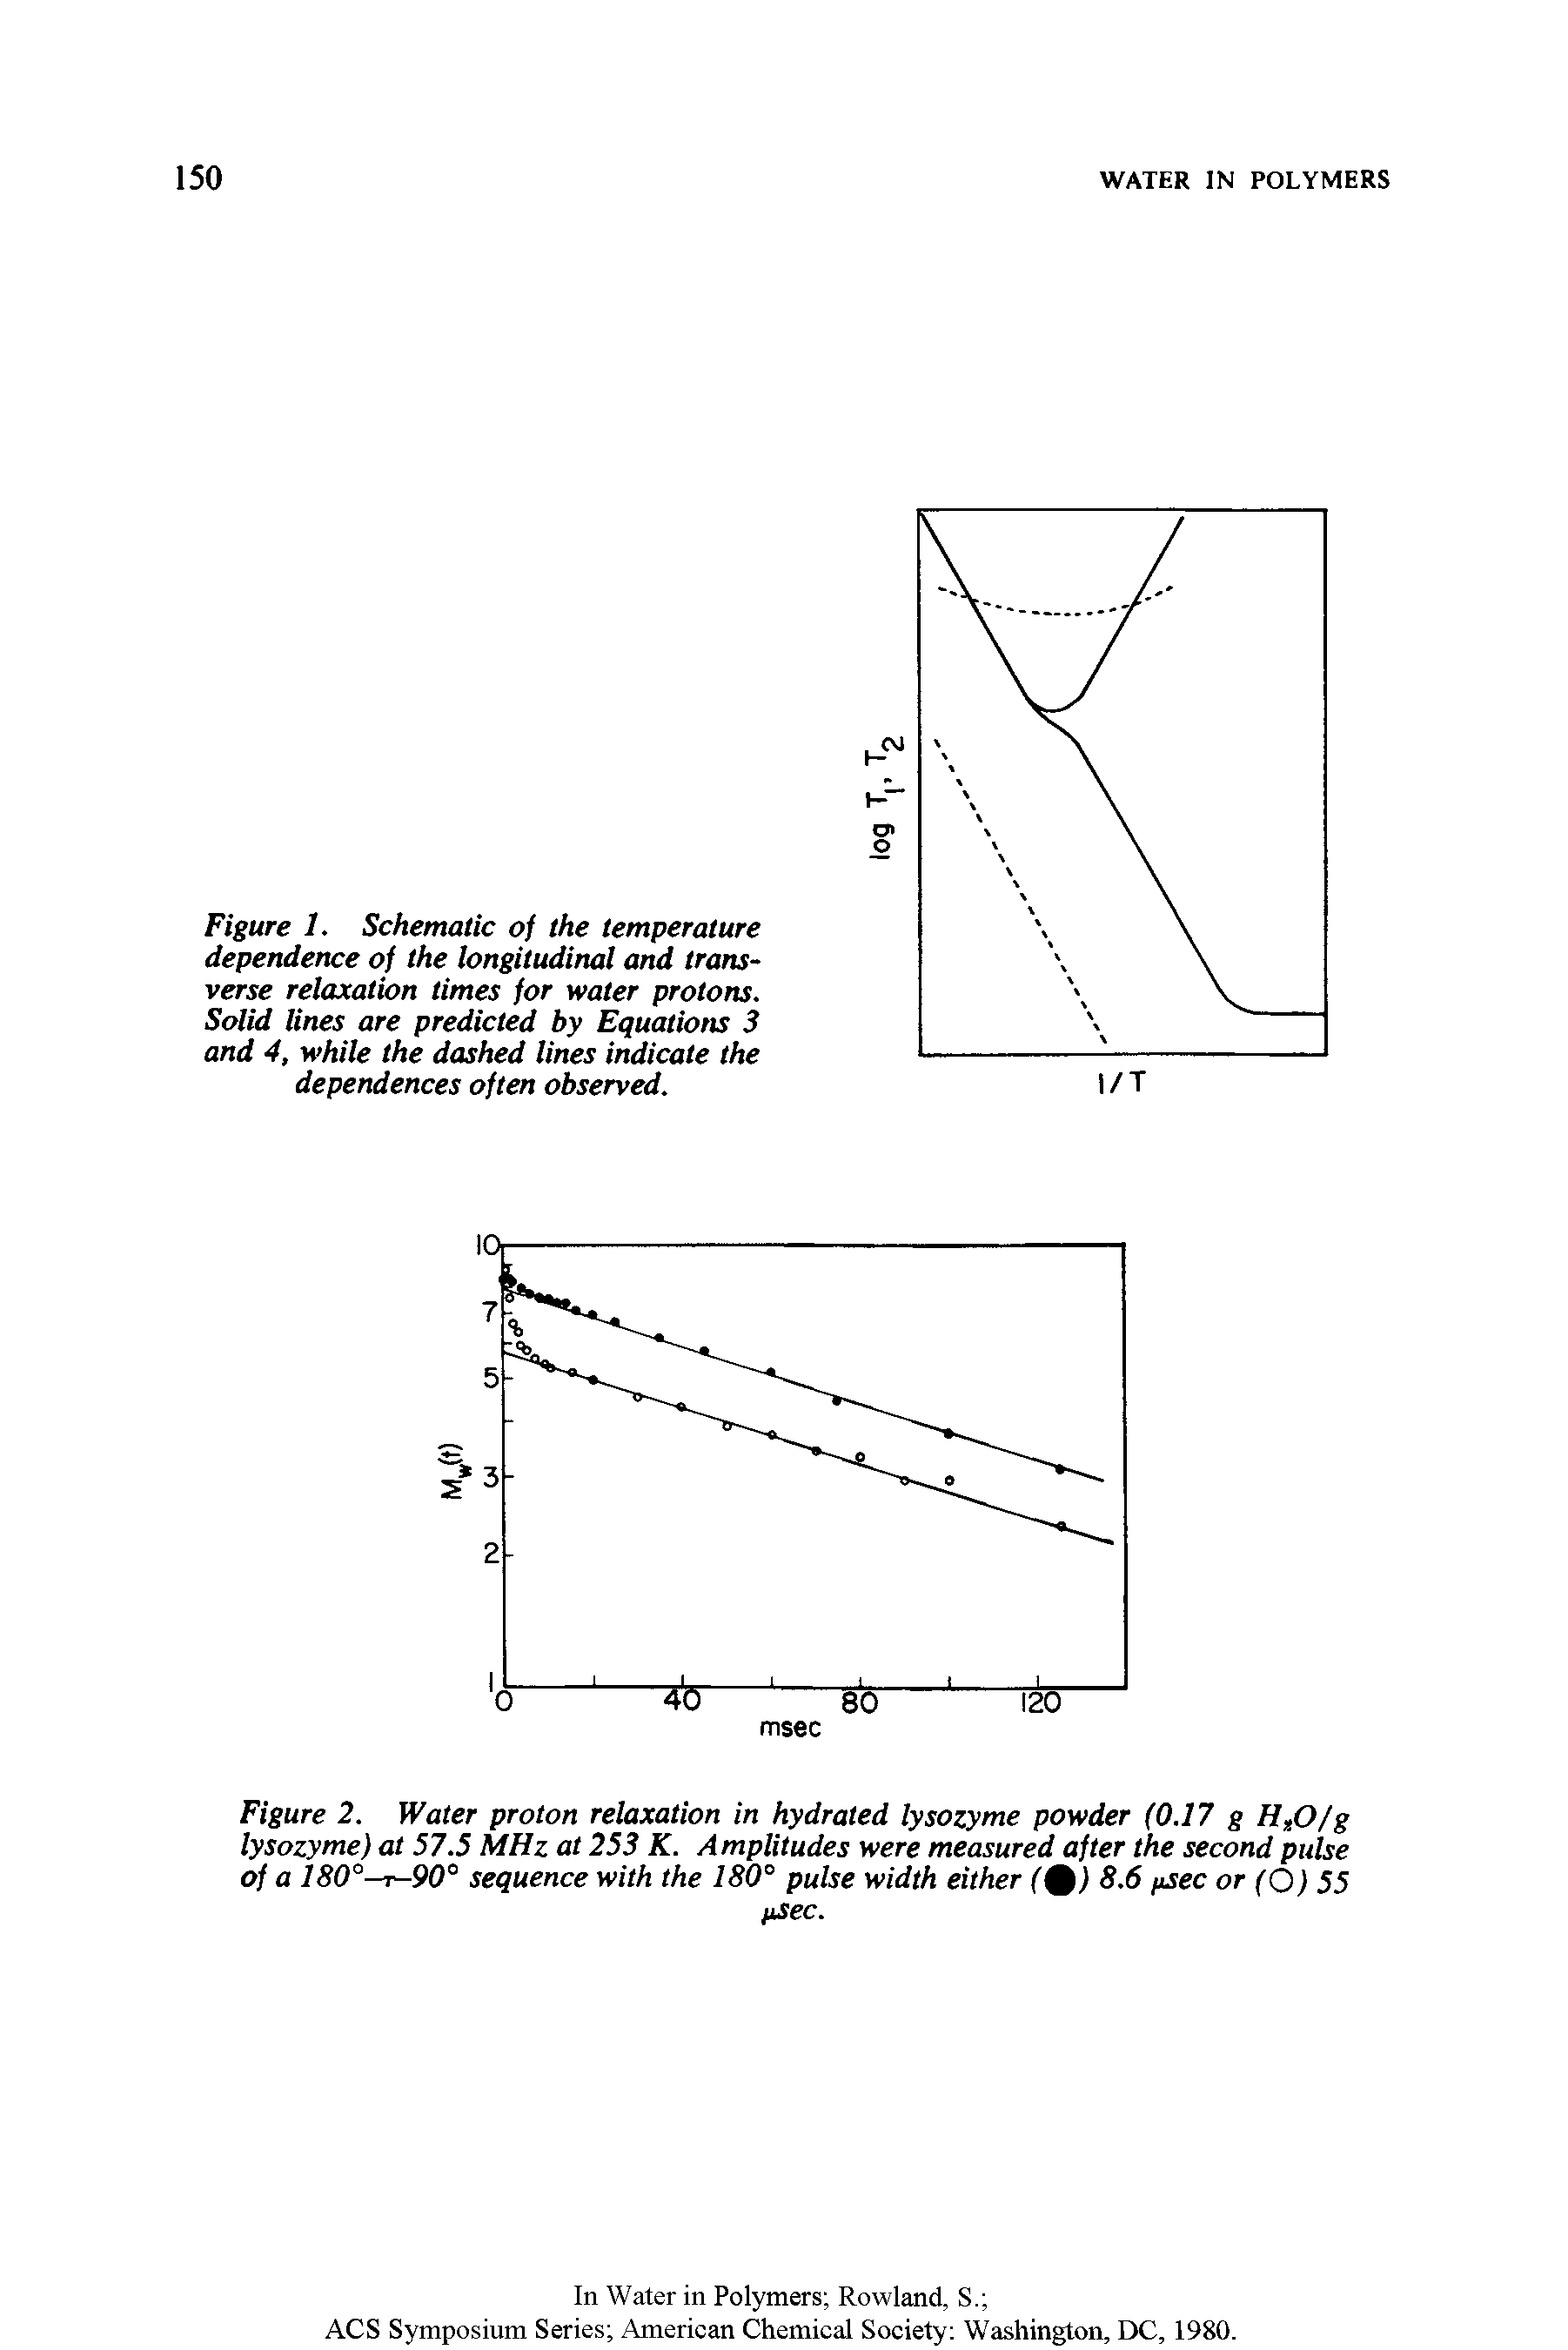 Figure 2. Water proton relaxation in hydrated lysozyme powder (0.17 g HjO/g lysozyme) at 57.5 MHz at 253 K. Amplitudes were measured after the second pulse of a 180°-7-90° sequence with the 180° pulse width either (%) 8.6 /tsec or (Q) 55...